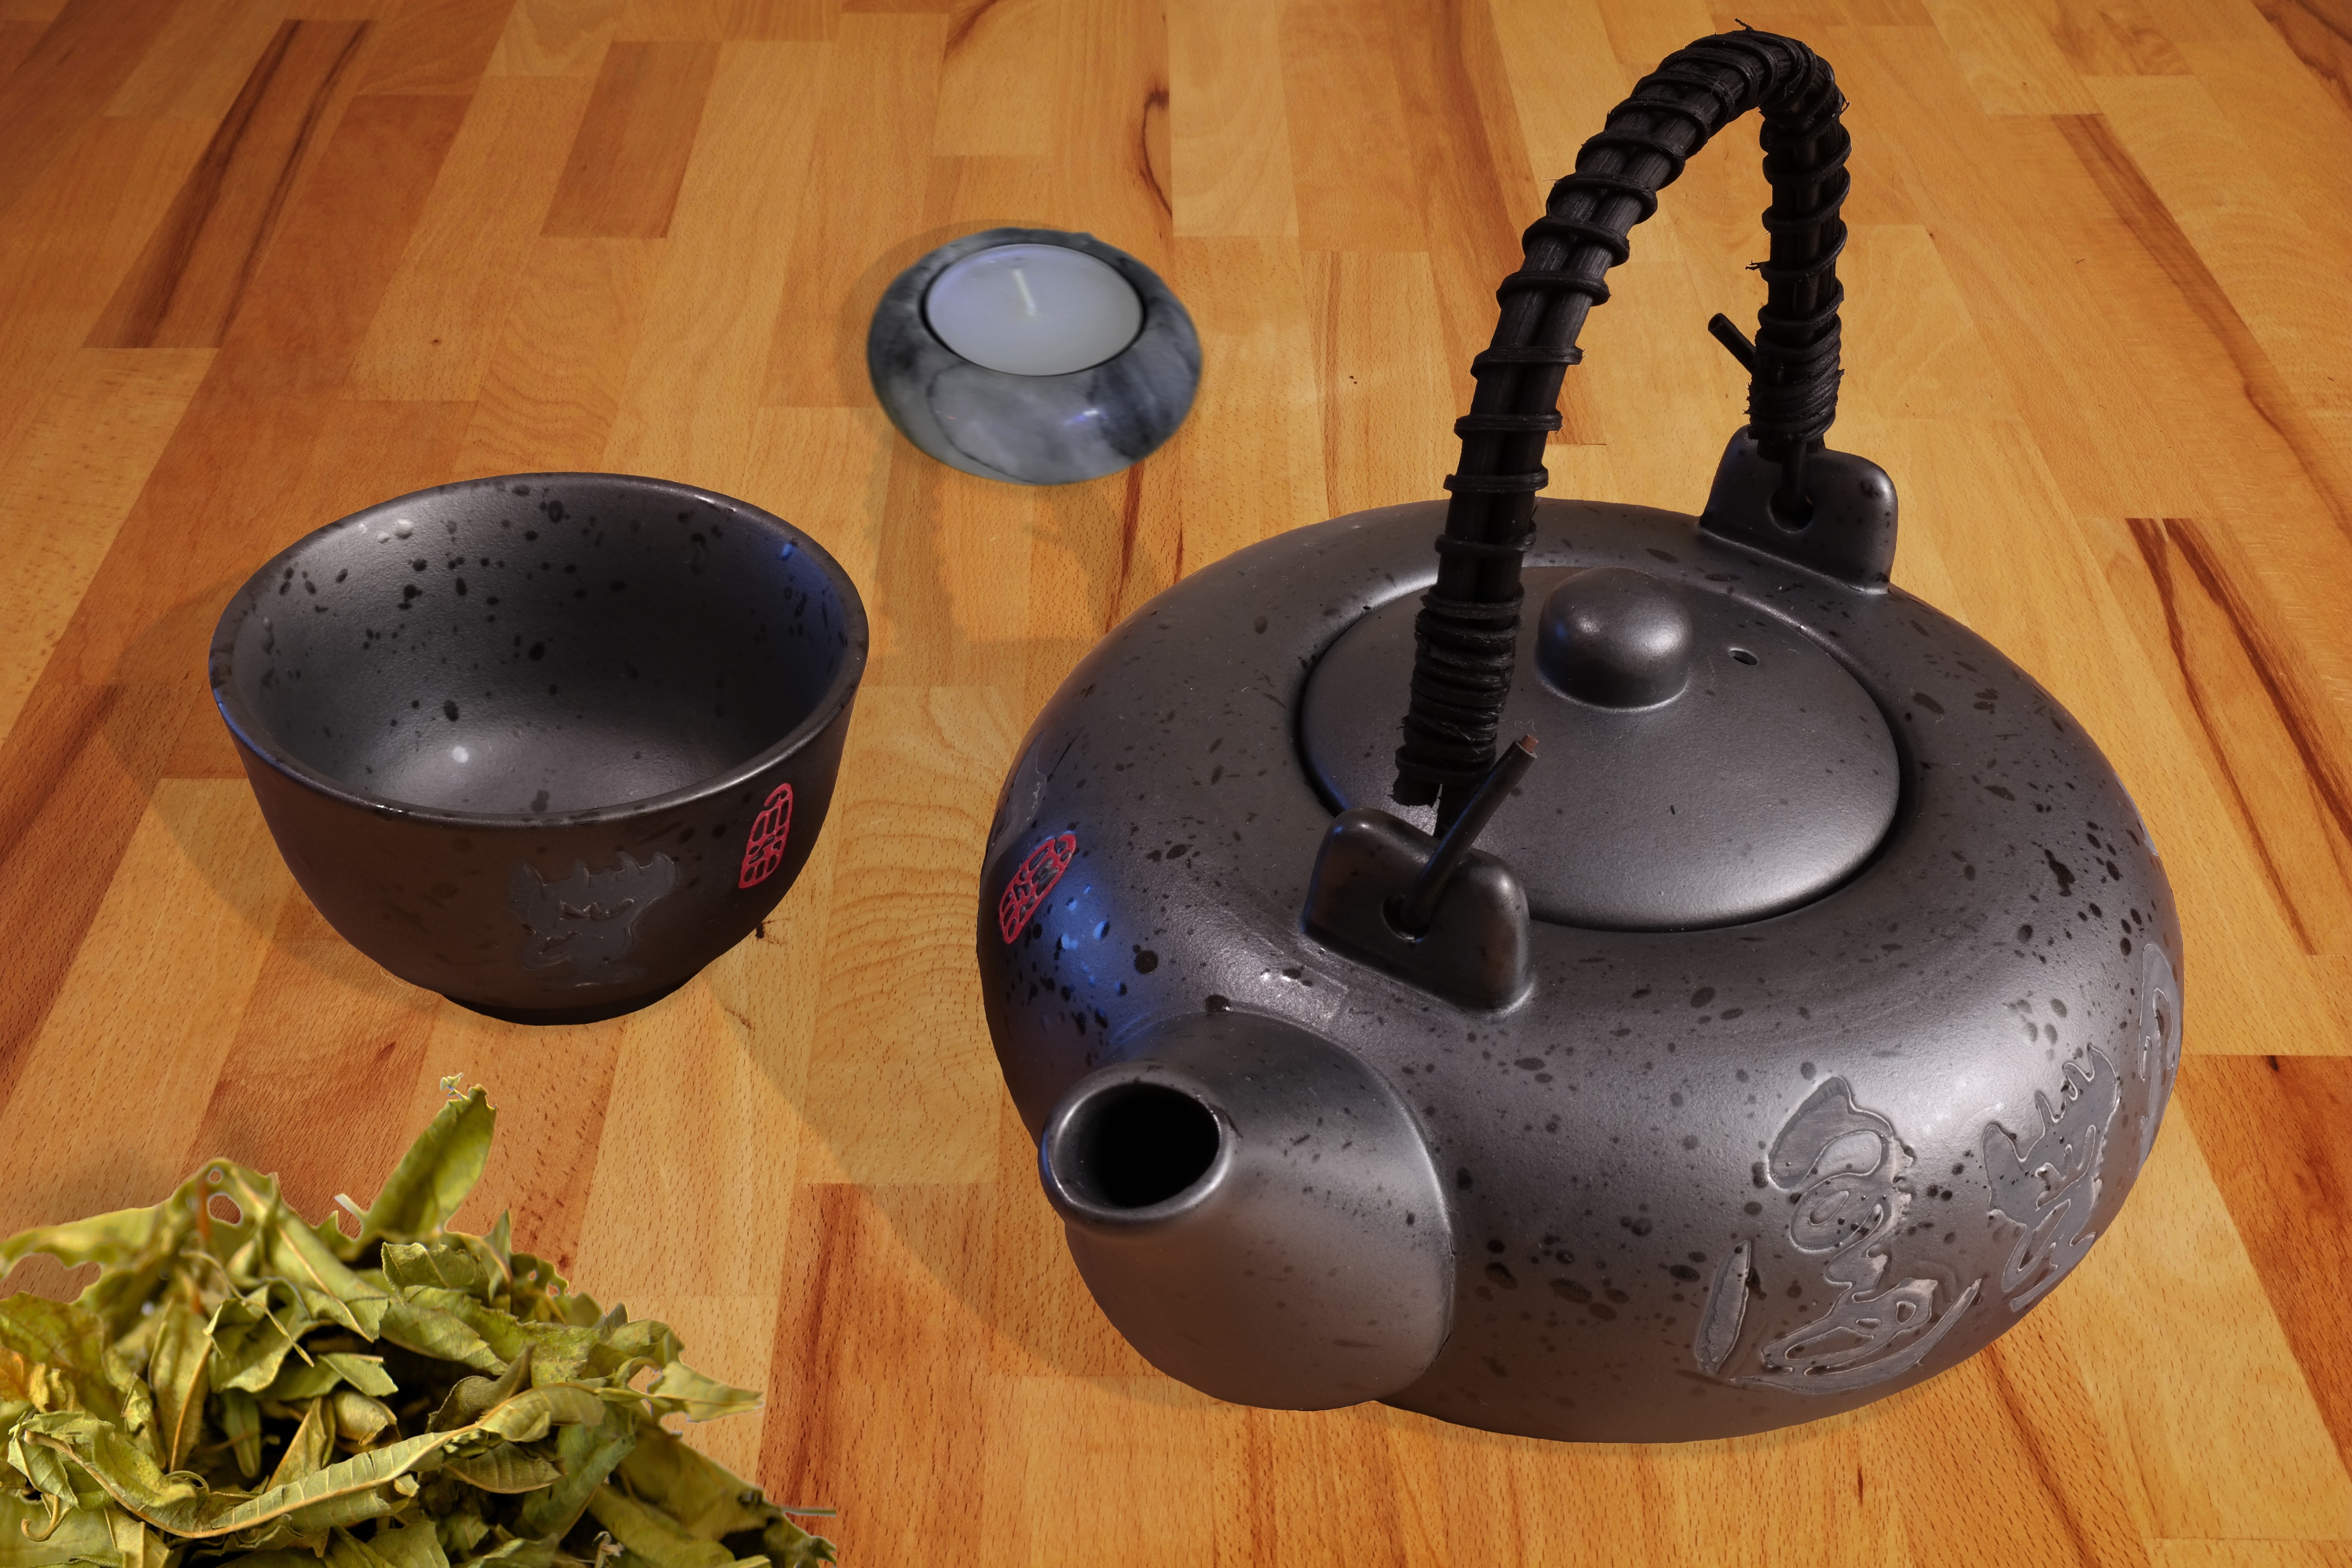 gray steel kettle beside gray steel cup on top of brown wooden surface